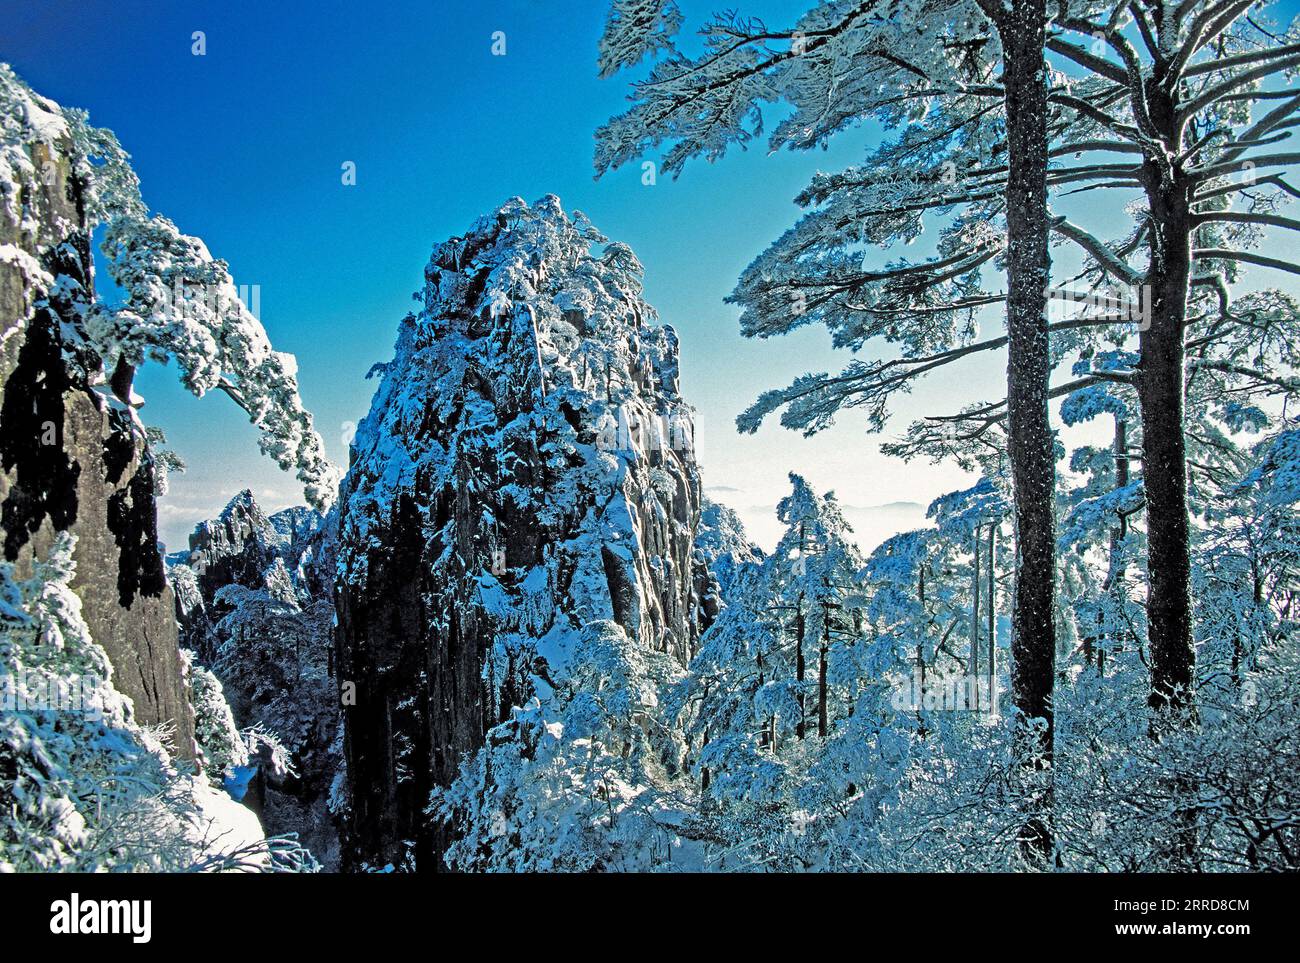 Huangshan (montagna gialla), Anhui, Cina: BEGIN to Believe Peak and Pines with Fresh Winter Snow. Foto Stock